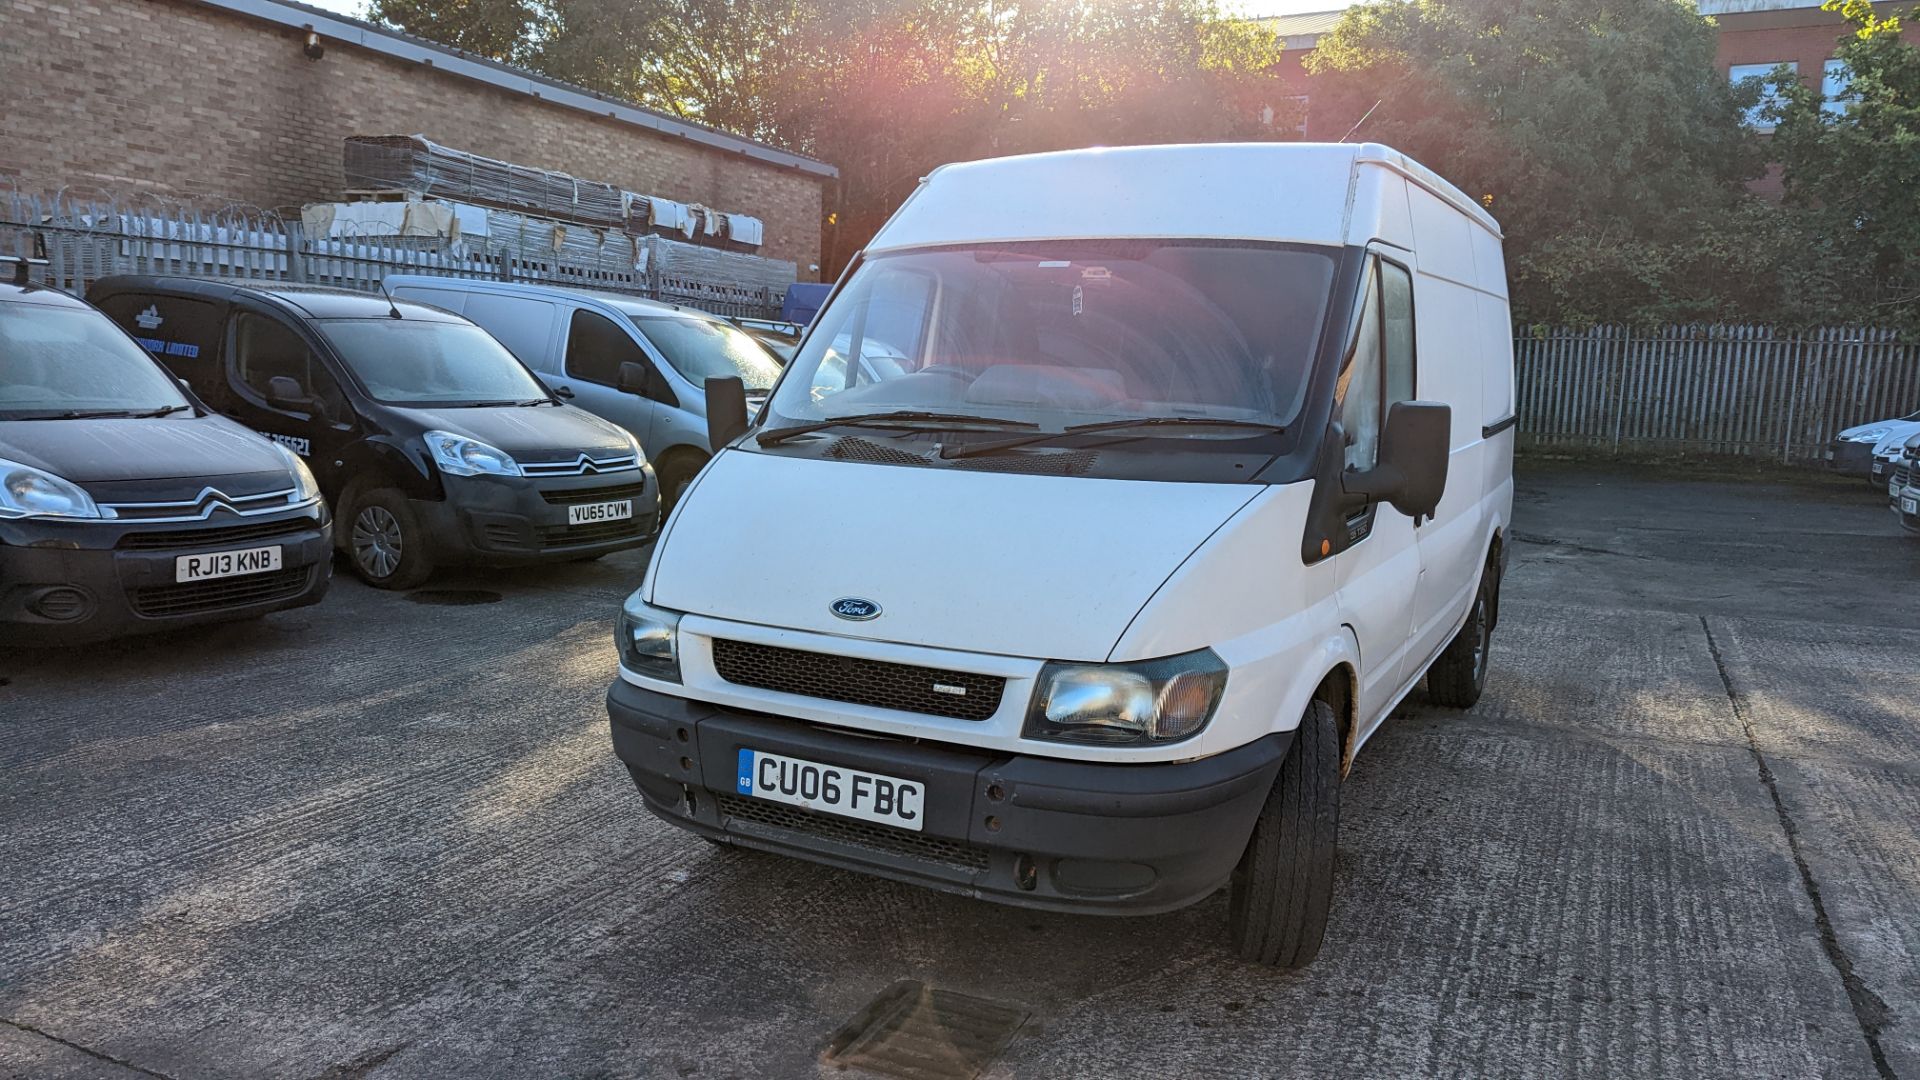 CU06 FBC Ford Transit panel van, 6 speed manual gearbox, 2402cc diesel engine. Colour: white. Fir - Image 40 of 44